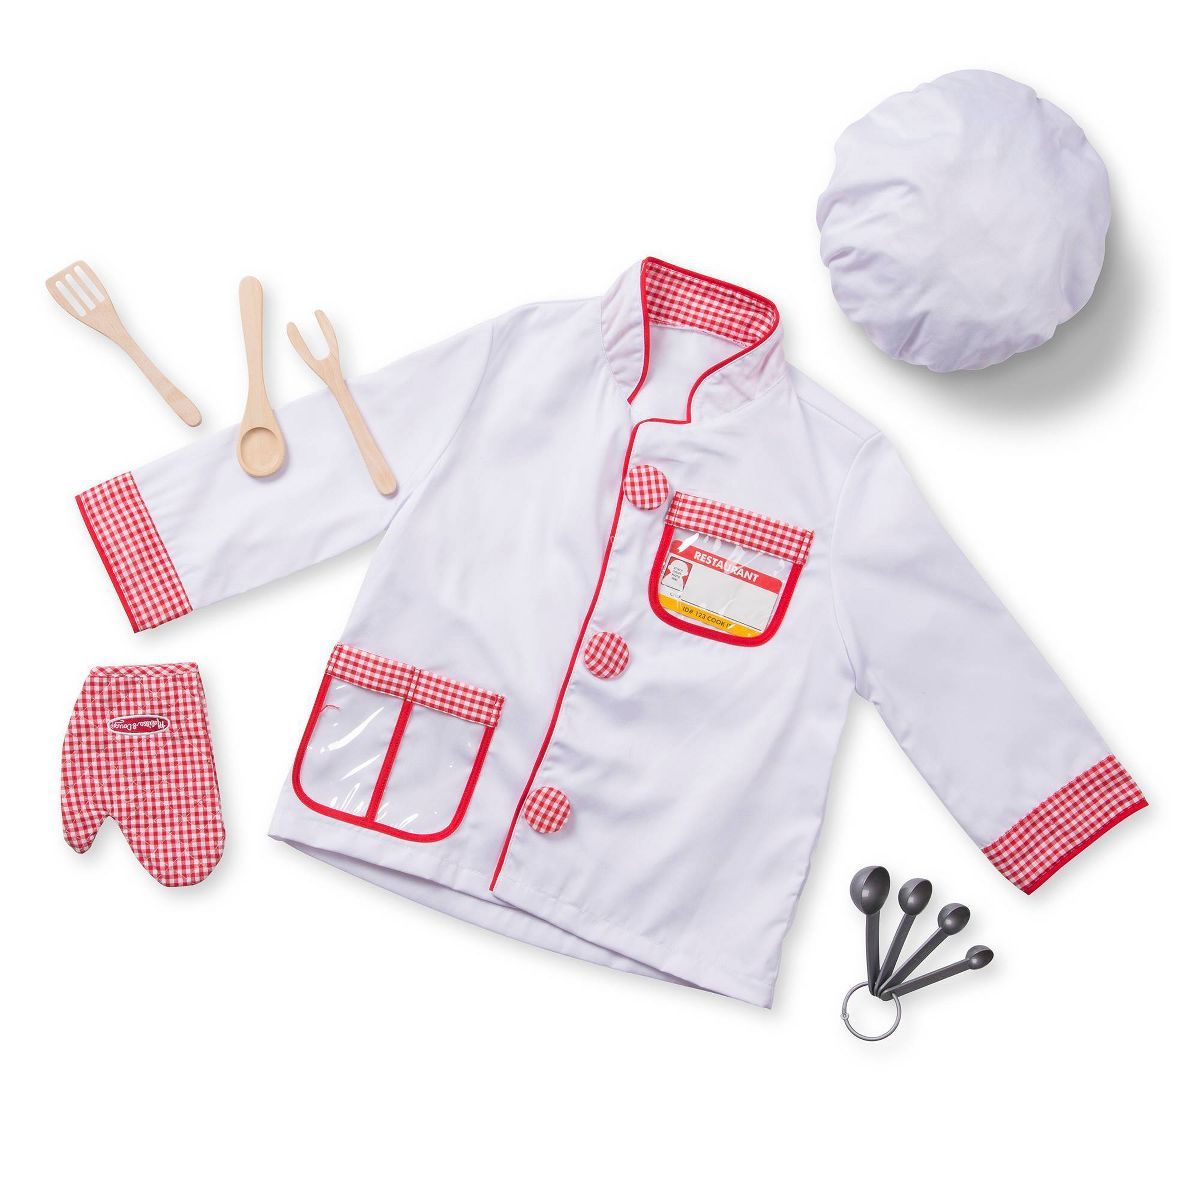 Melissa & Doug Chef Role Play Costume Dress - Up Set With Realistic Accessories | Target